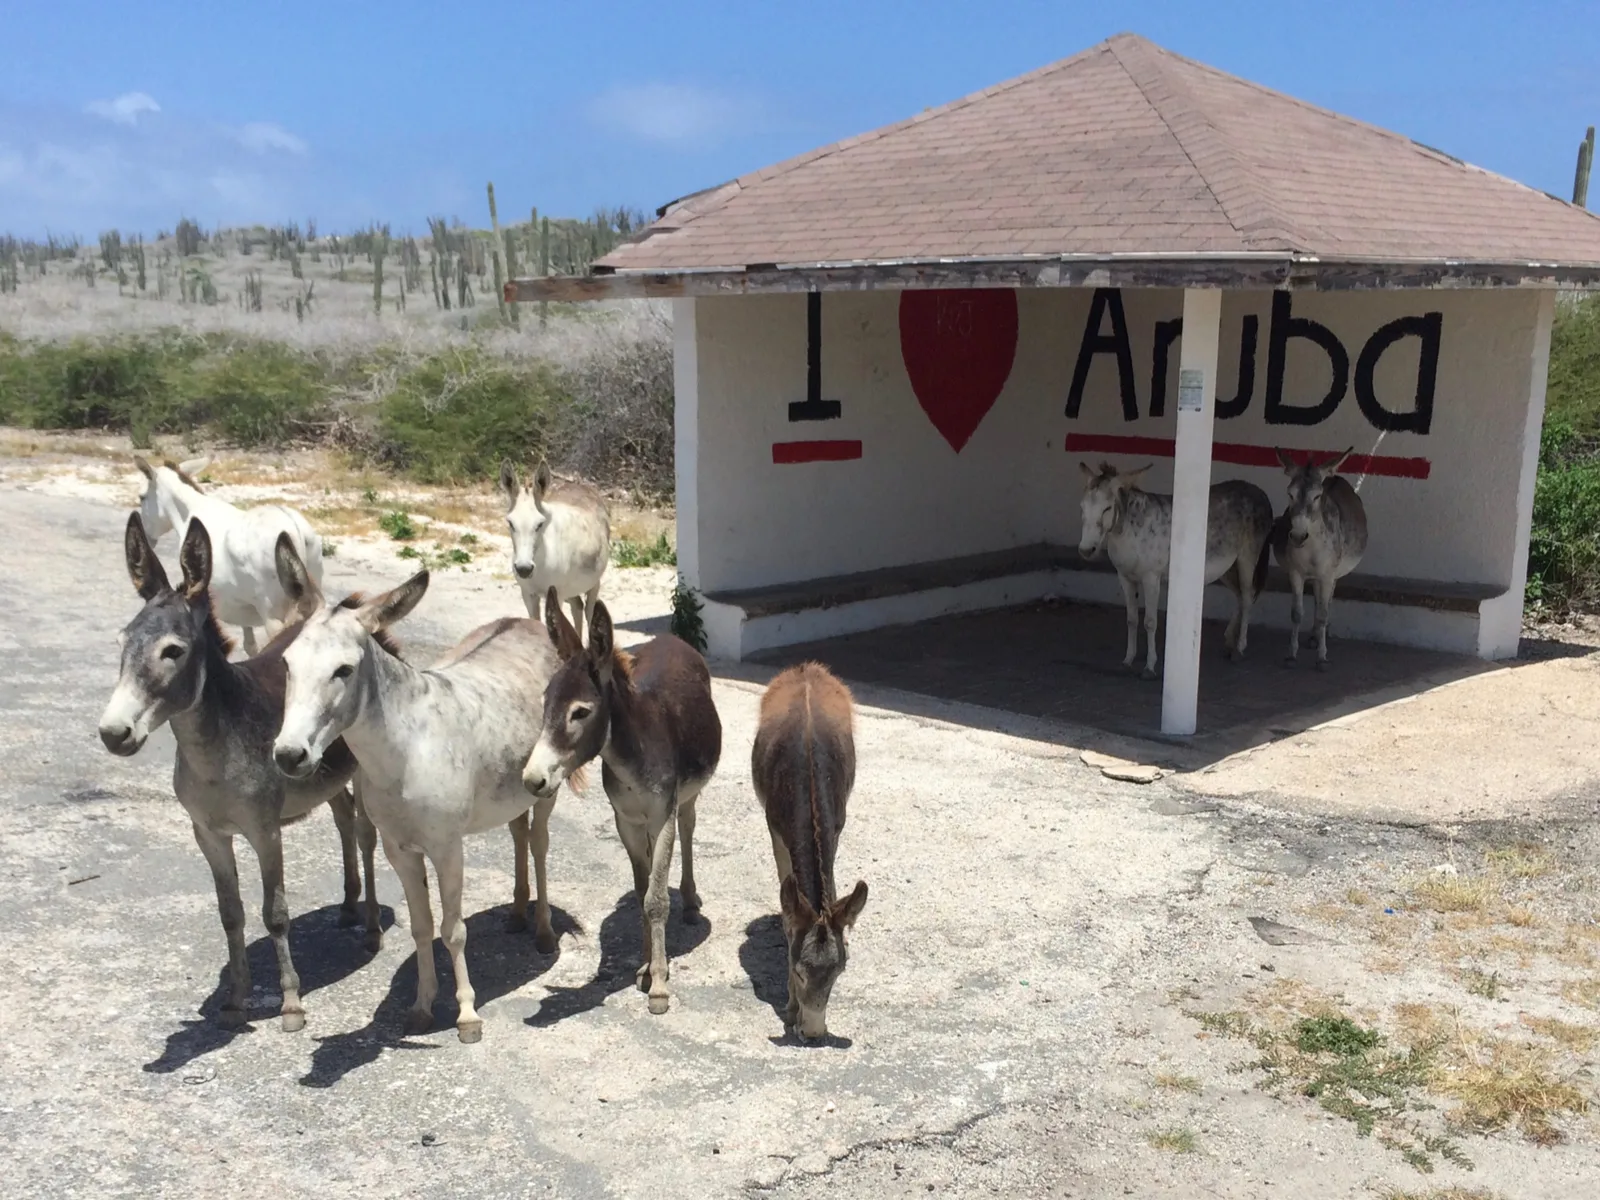 Donkeys on a beach, one of the best thigs to do in Aruba